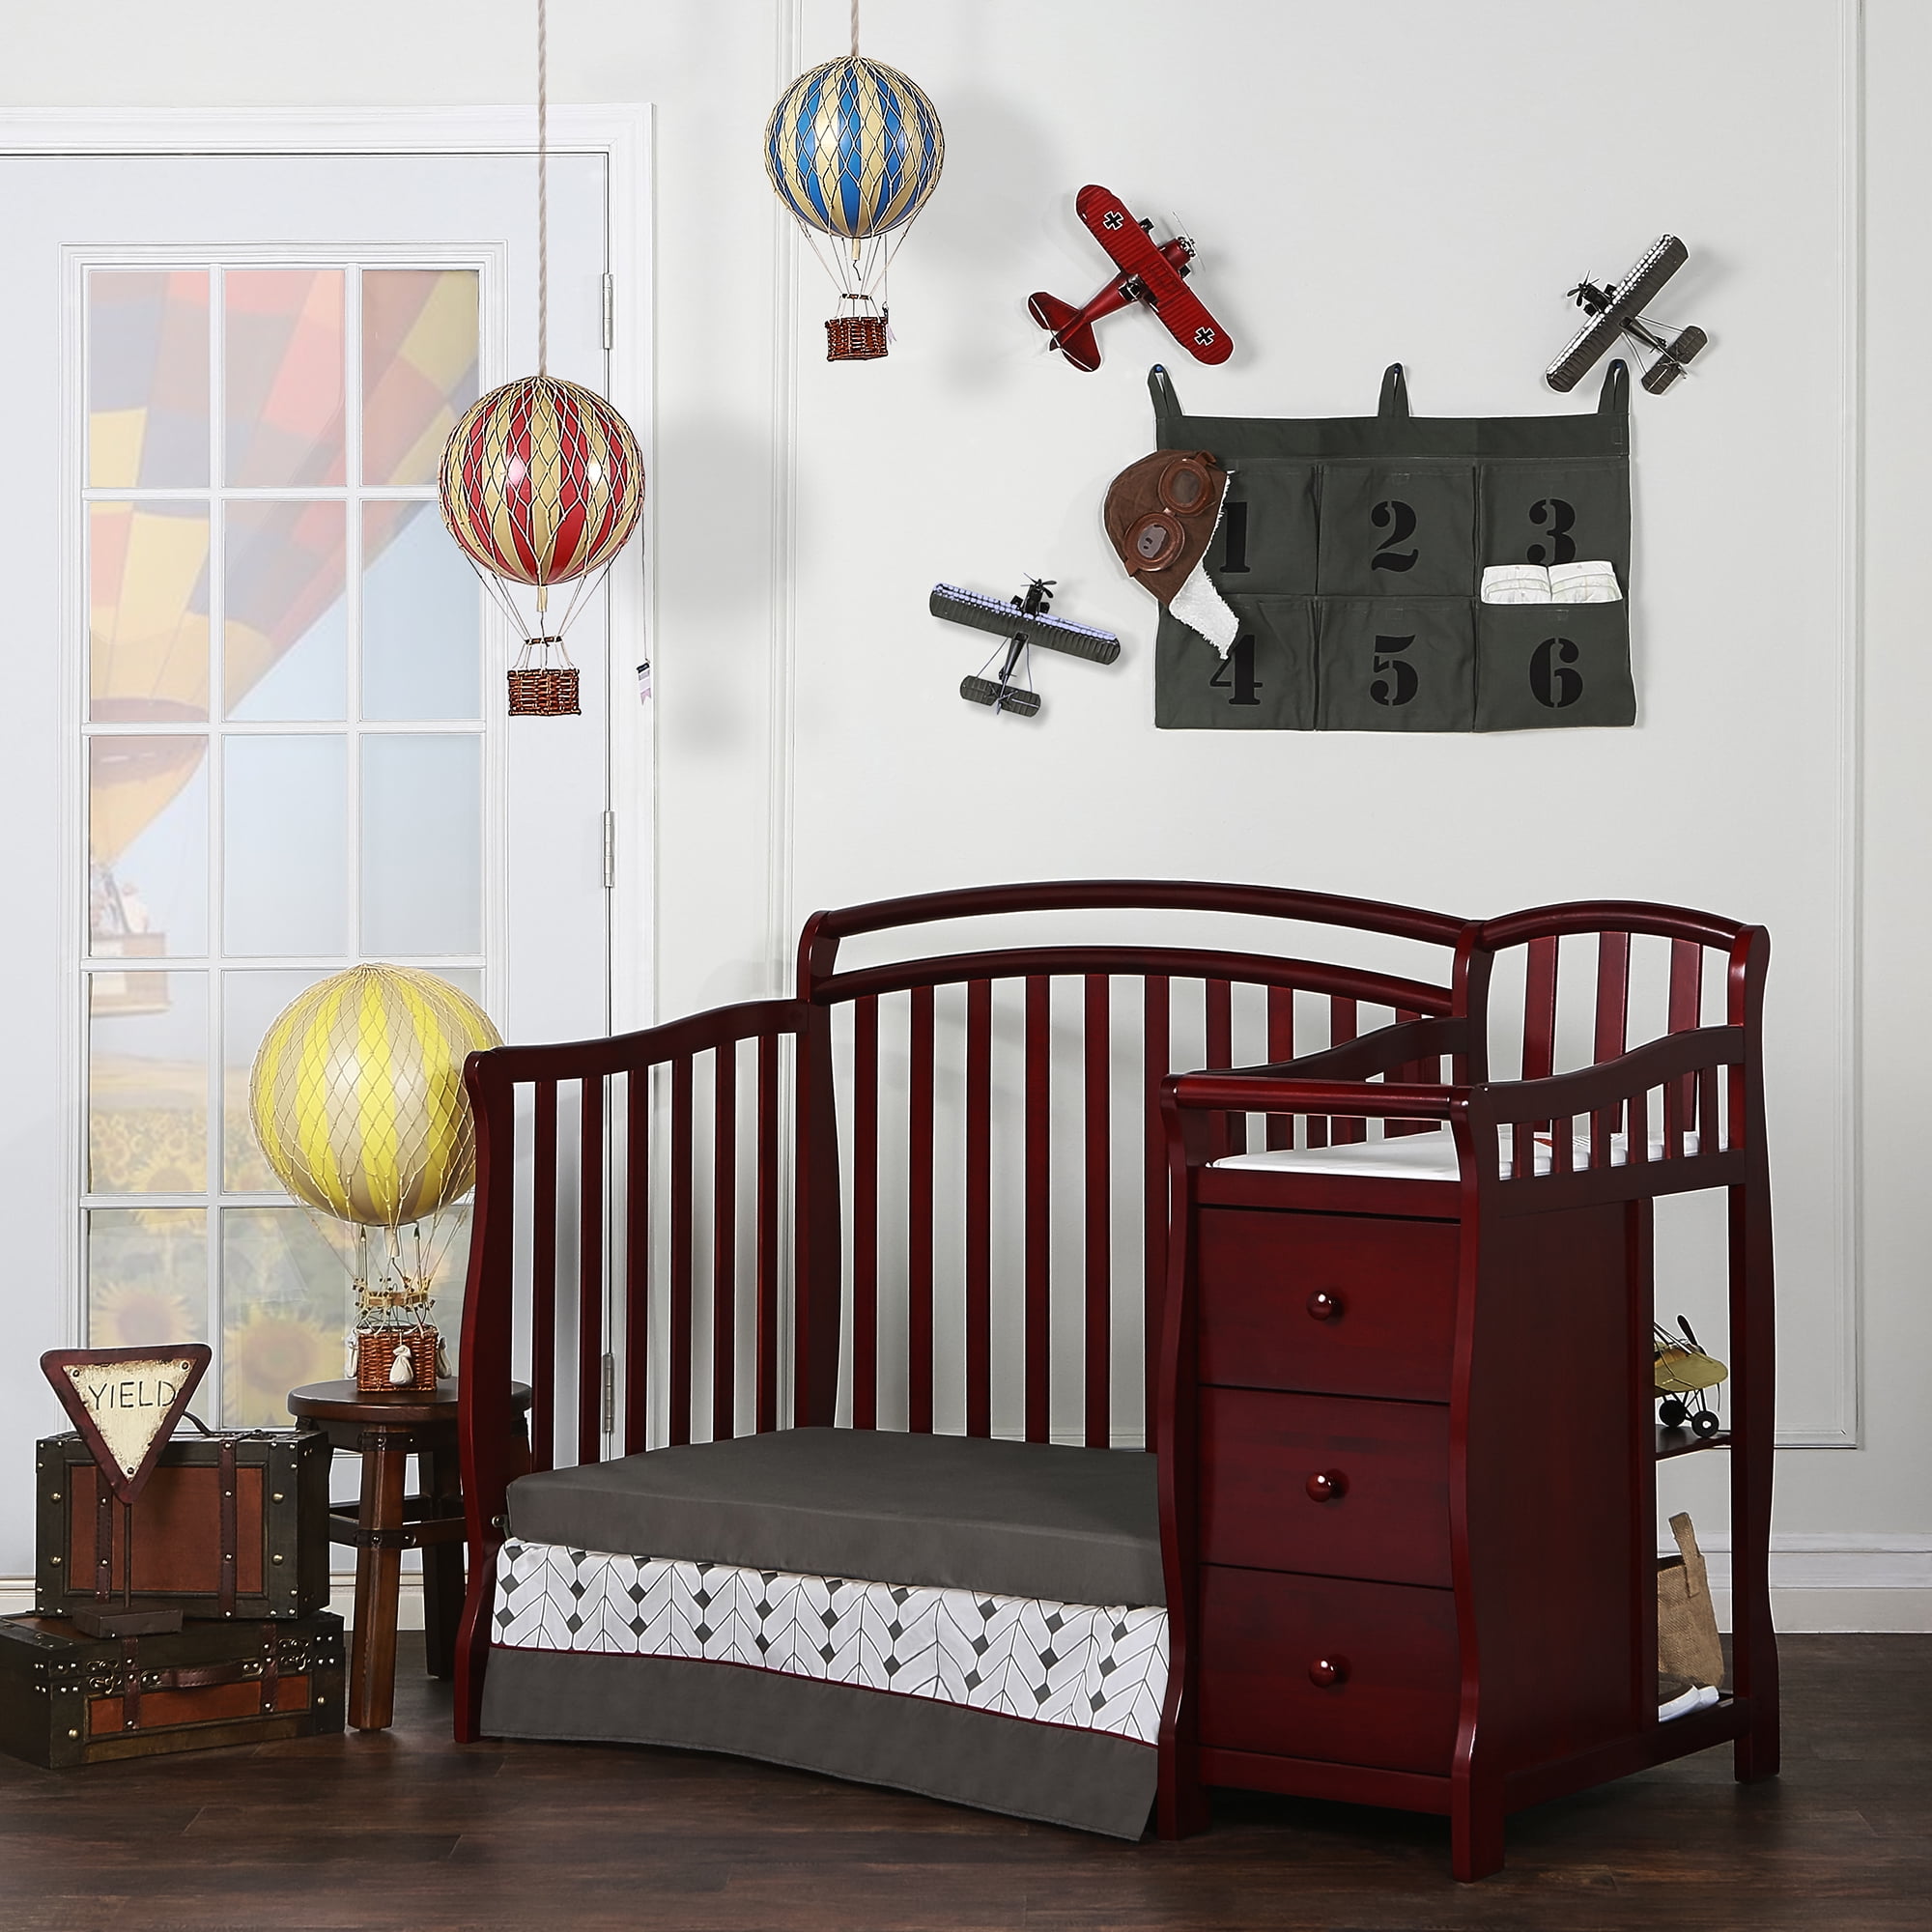 mini crib with changing table attached